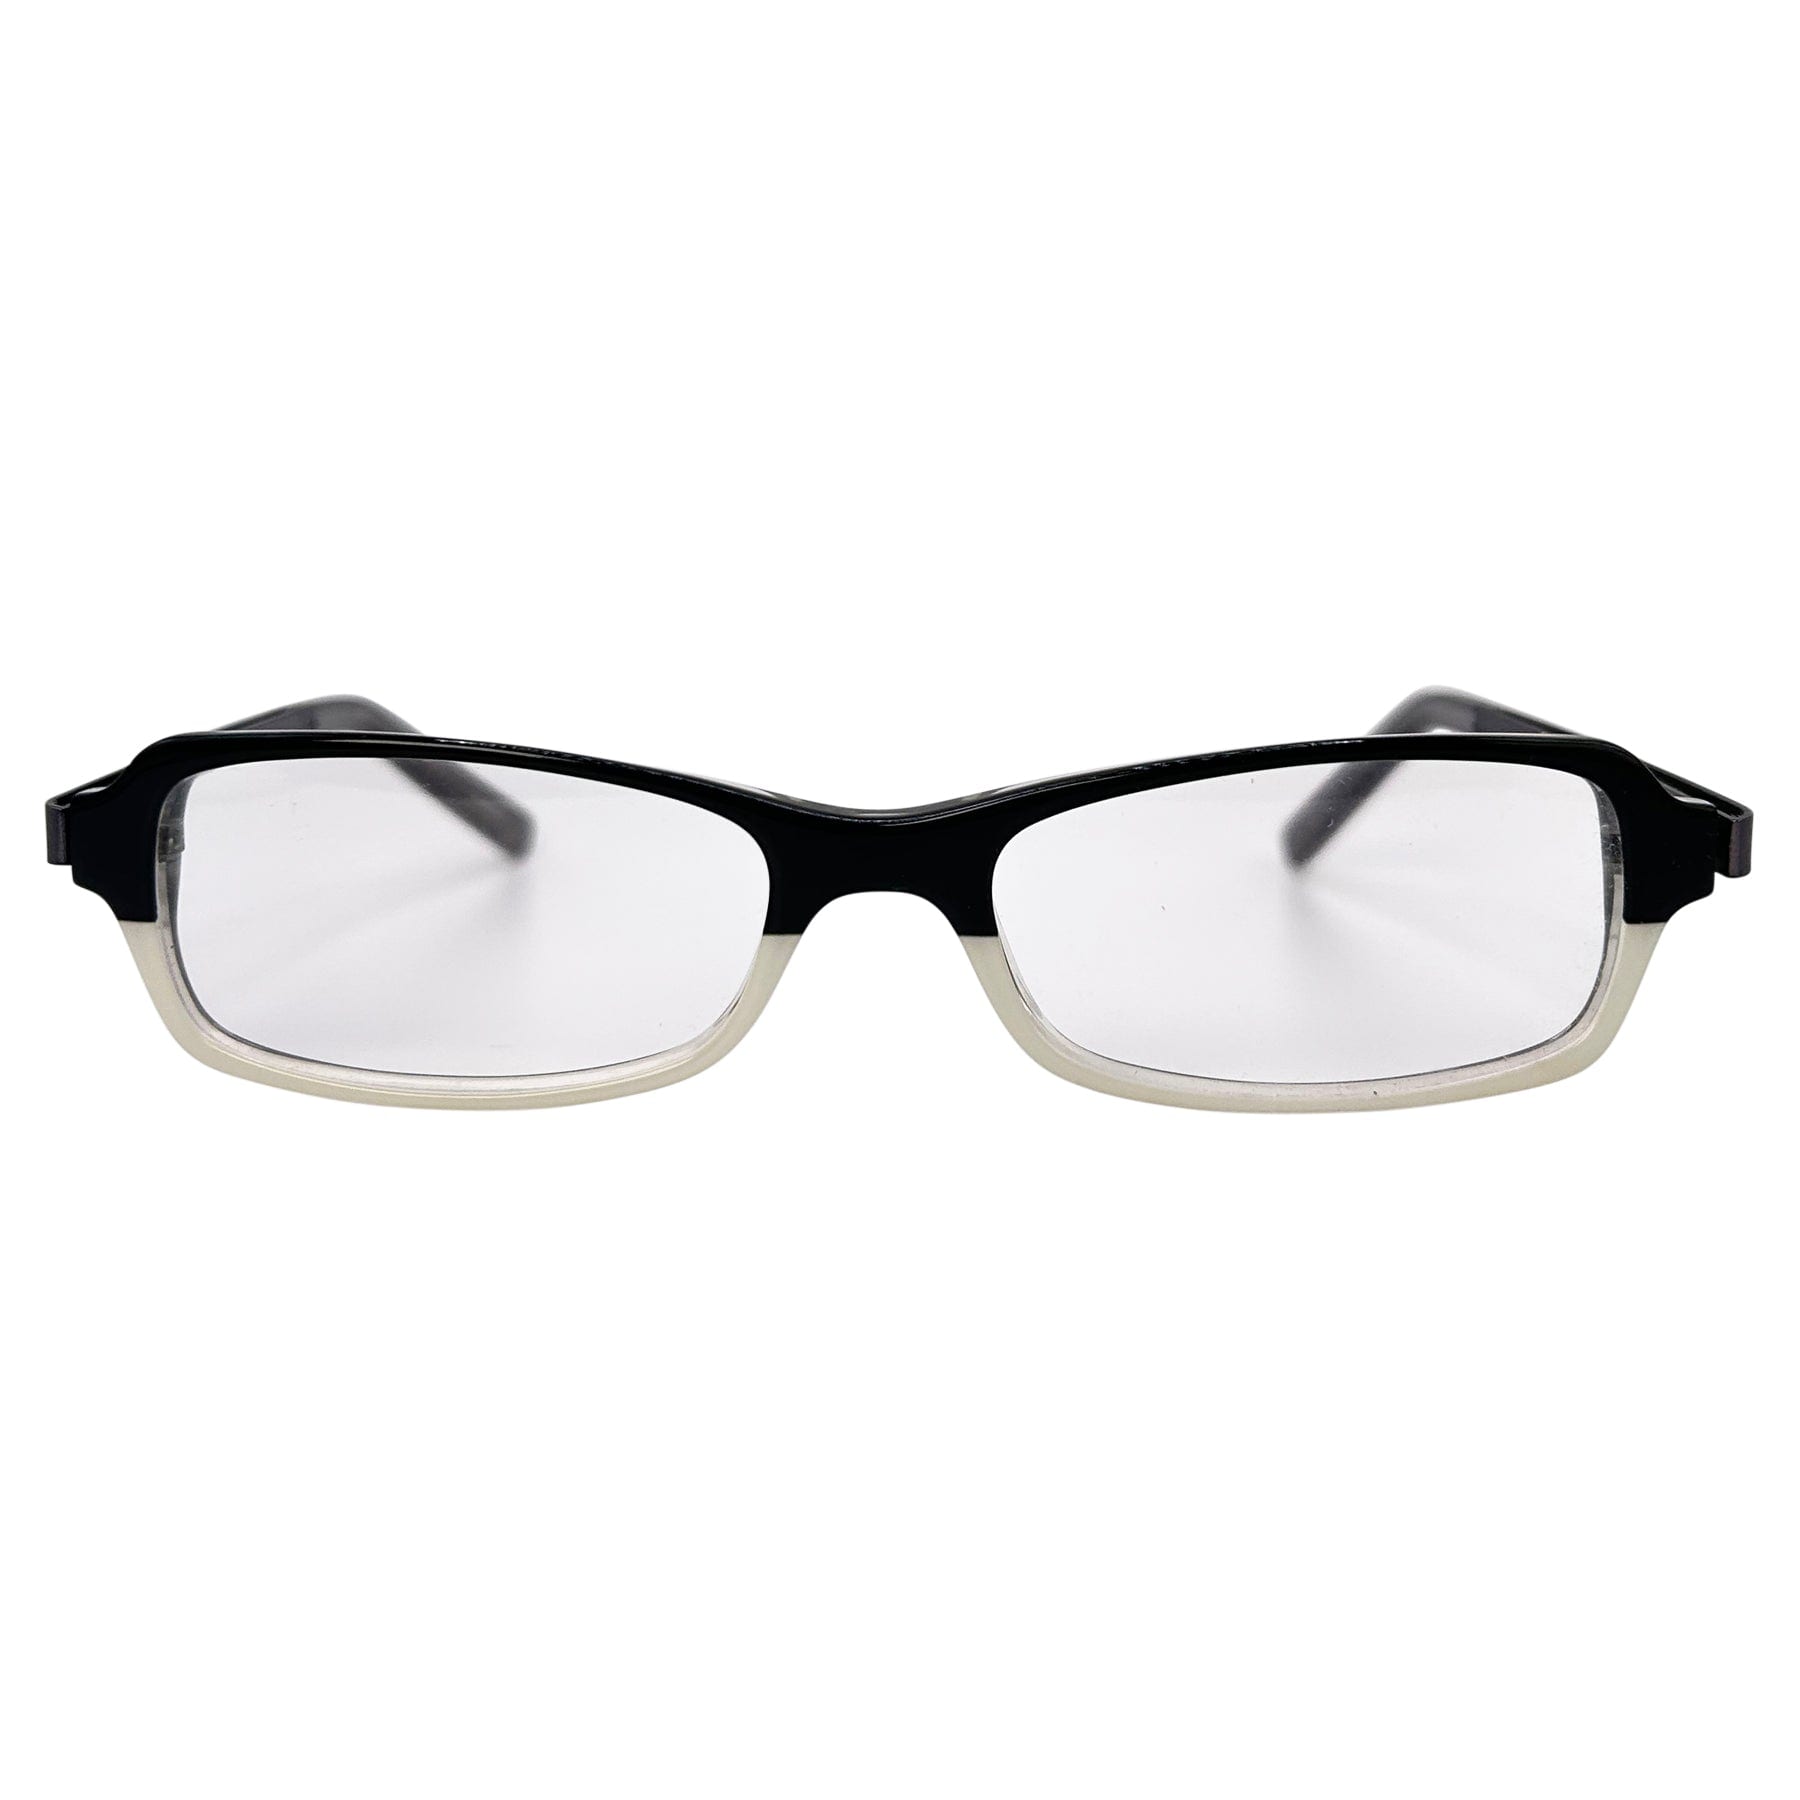 90s retro glasses with a square black and white frame